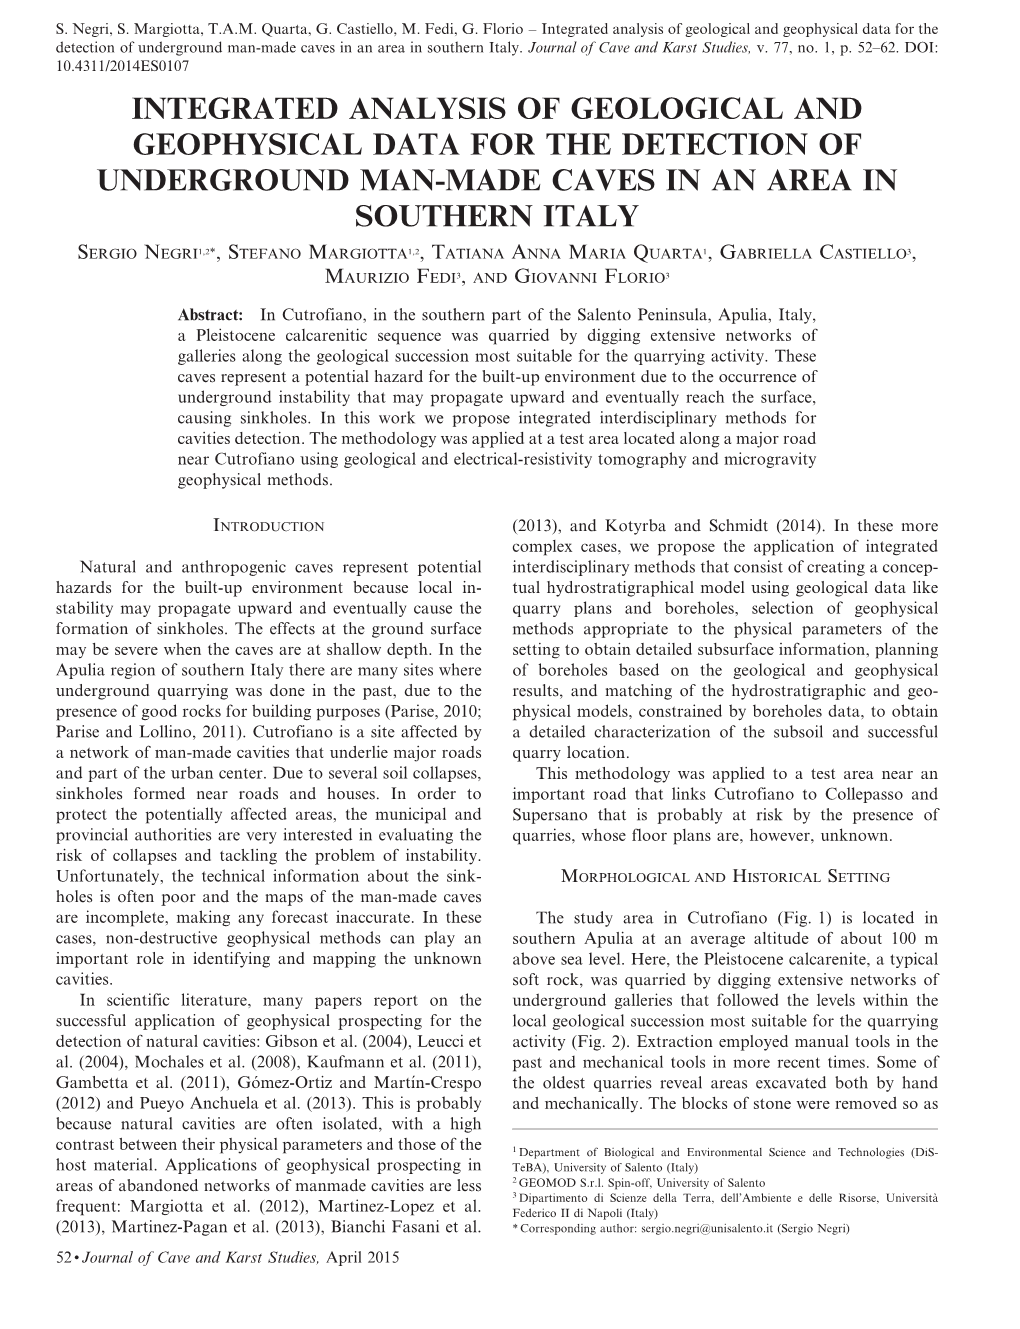 Integrated Analysis of Geological and Geophysical Data for the Detection of Underground Man-Made Caves in an Area in Southern Italy